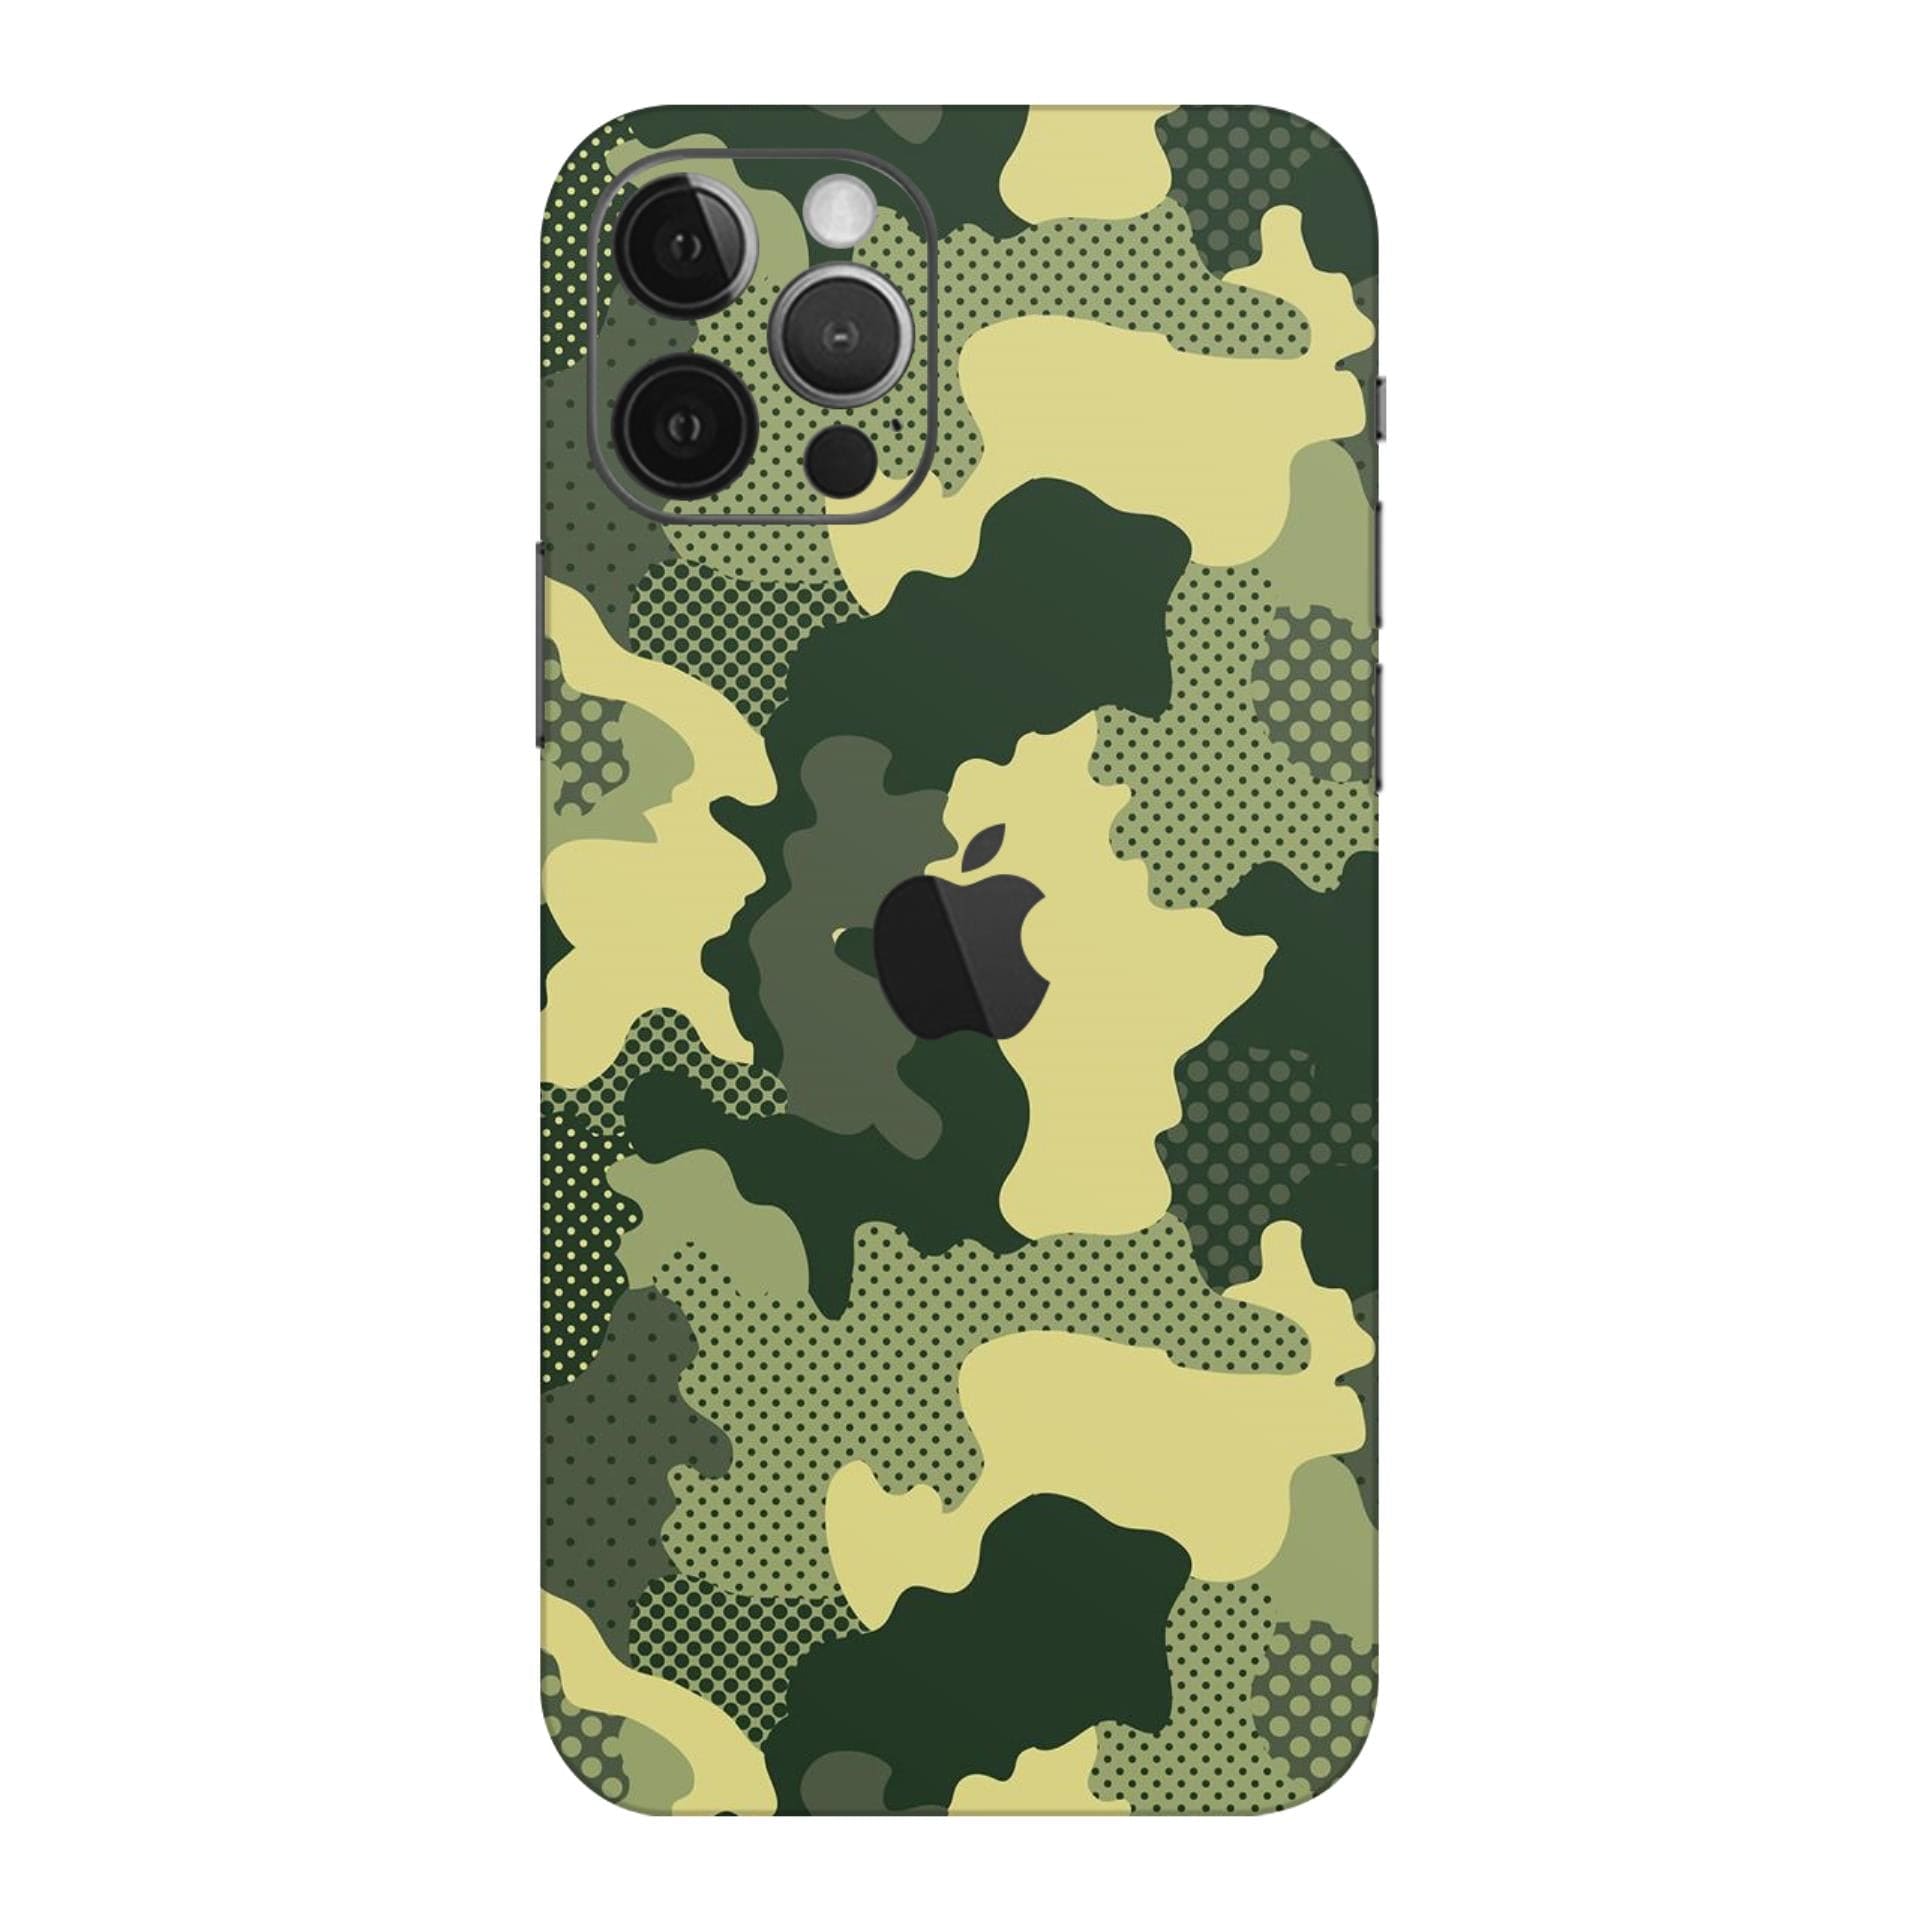 iphone 12 Pro Max Military Green Camo skins